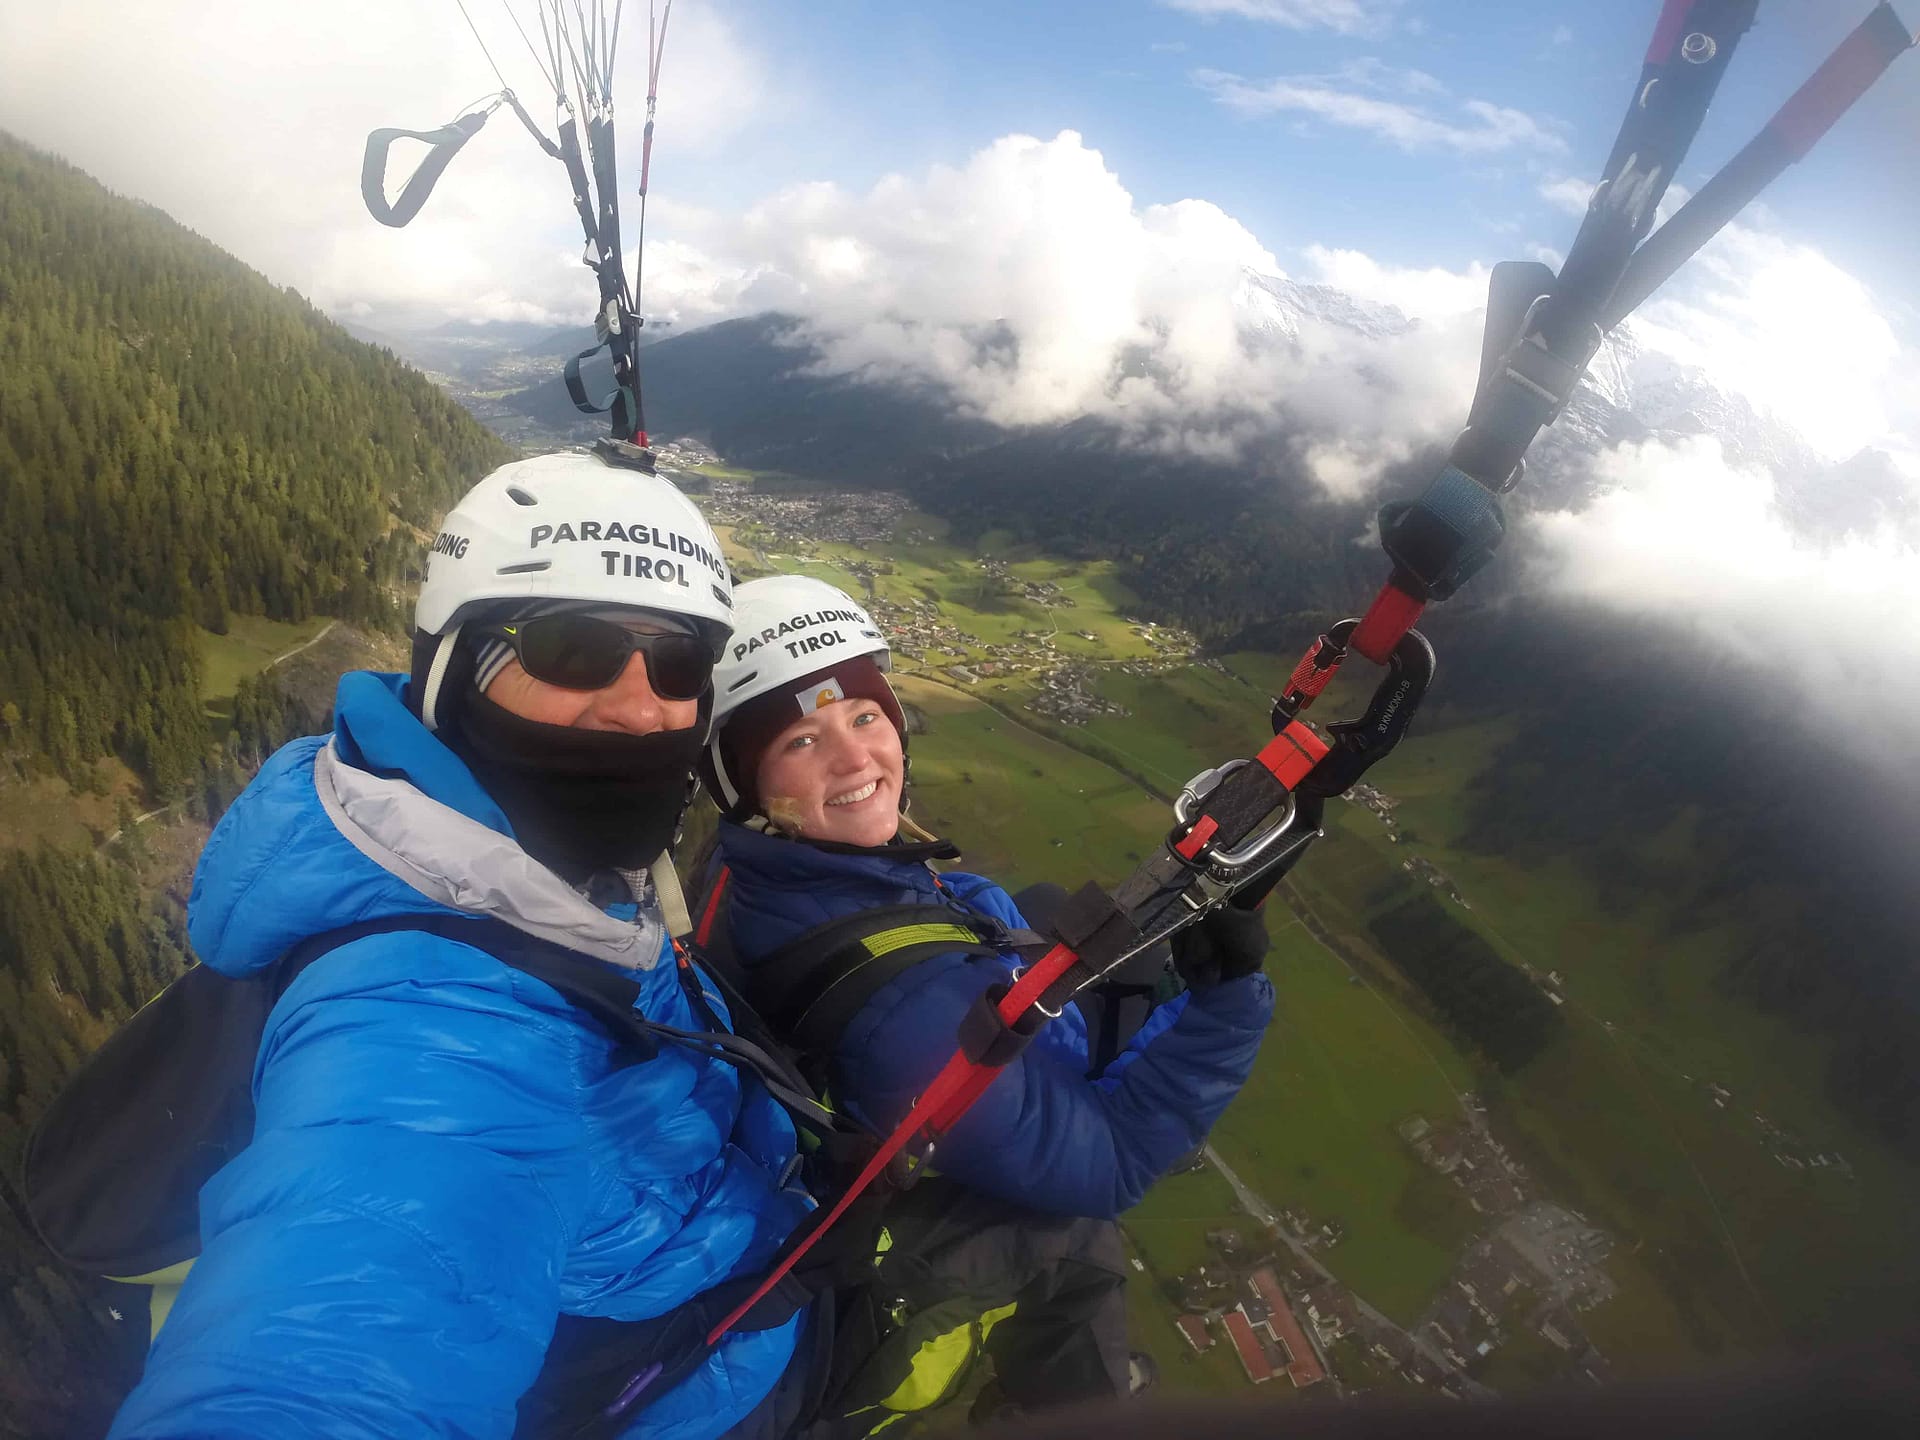 Studying abroad and paragliding in Austria